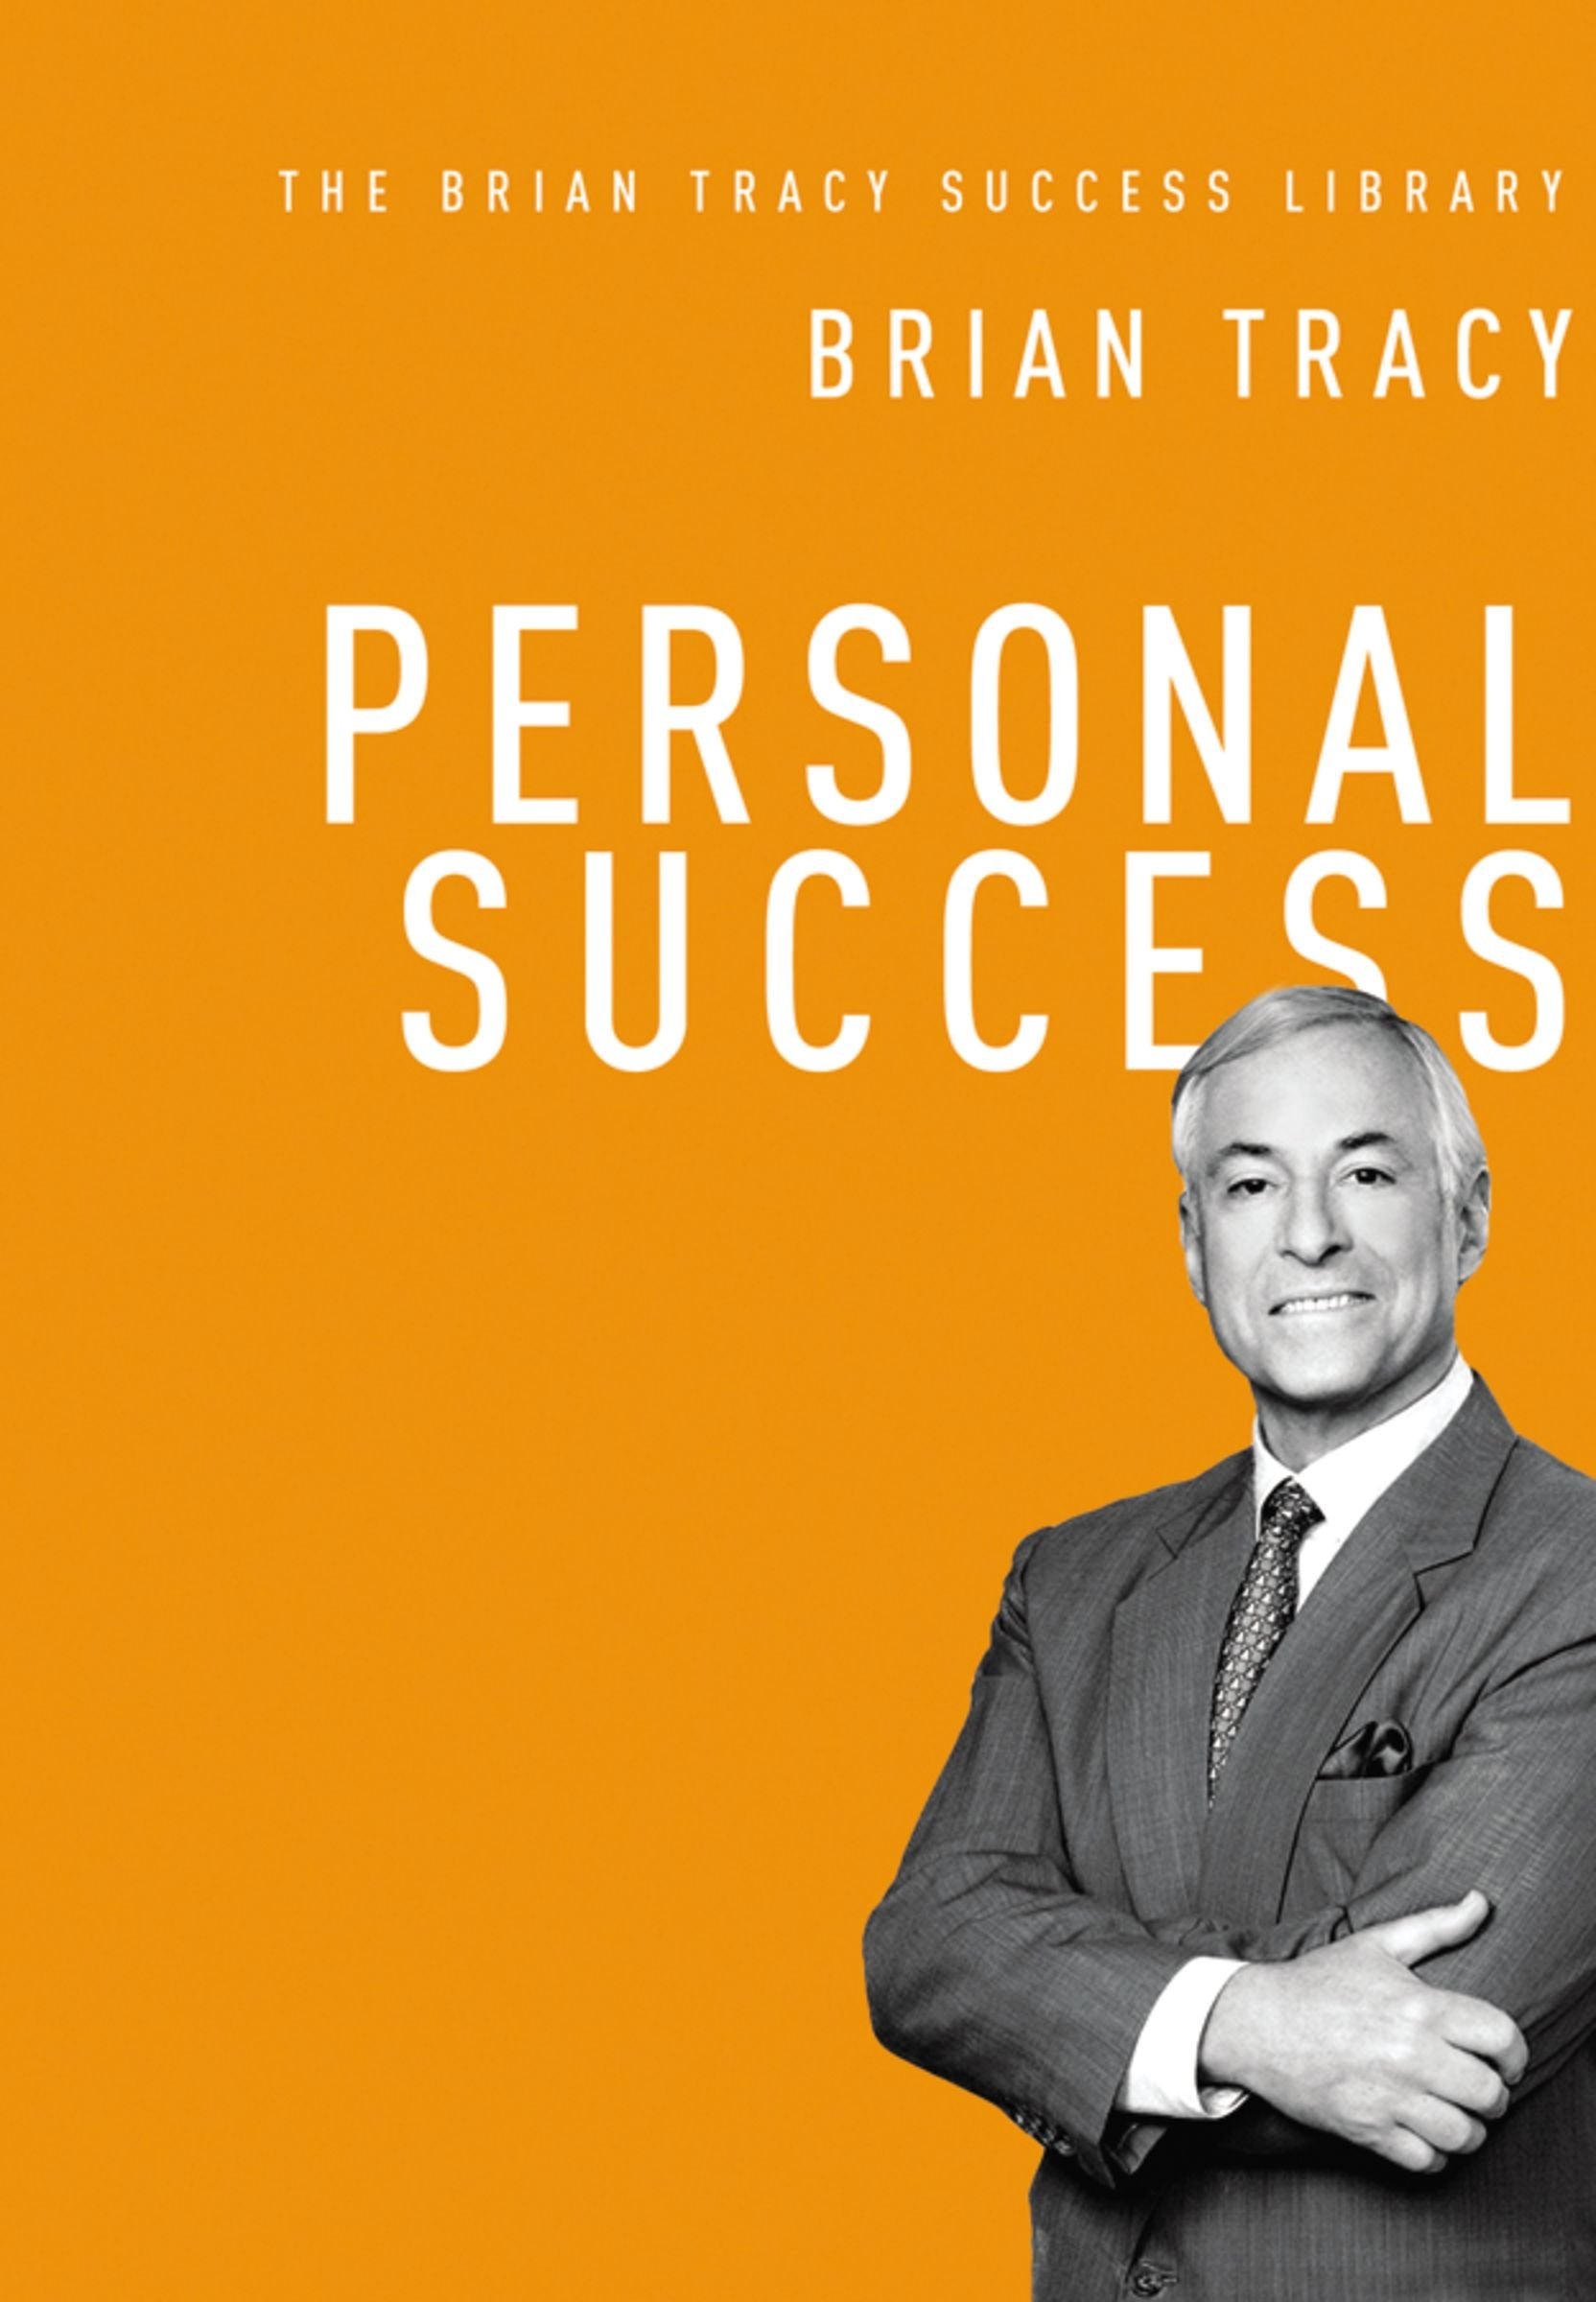 Personal Success (The Brian Tracy Success Library) Hardcover